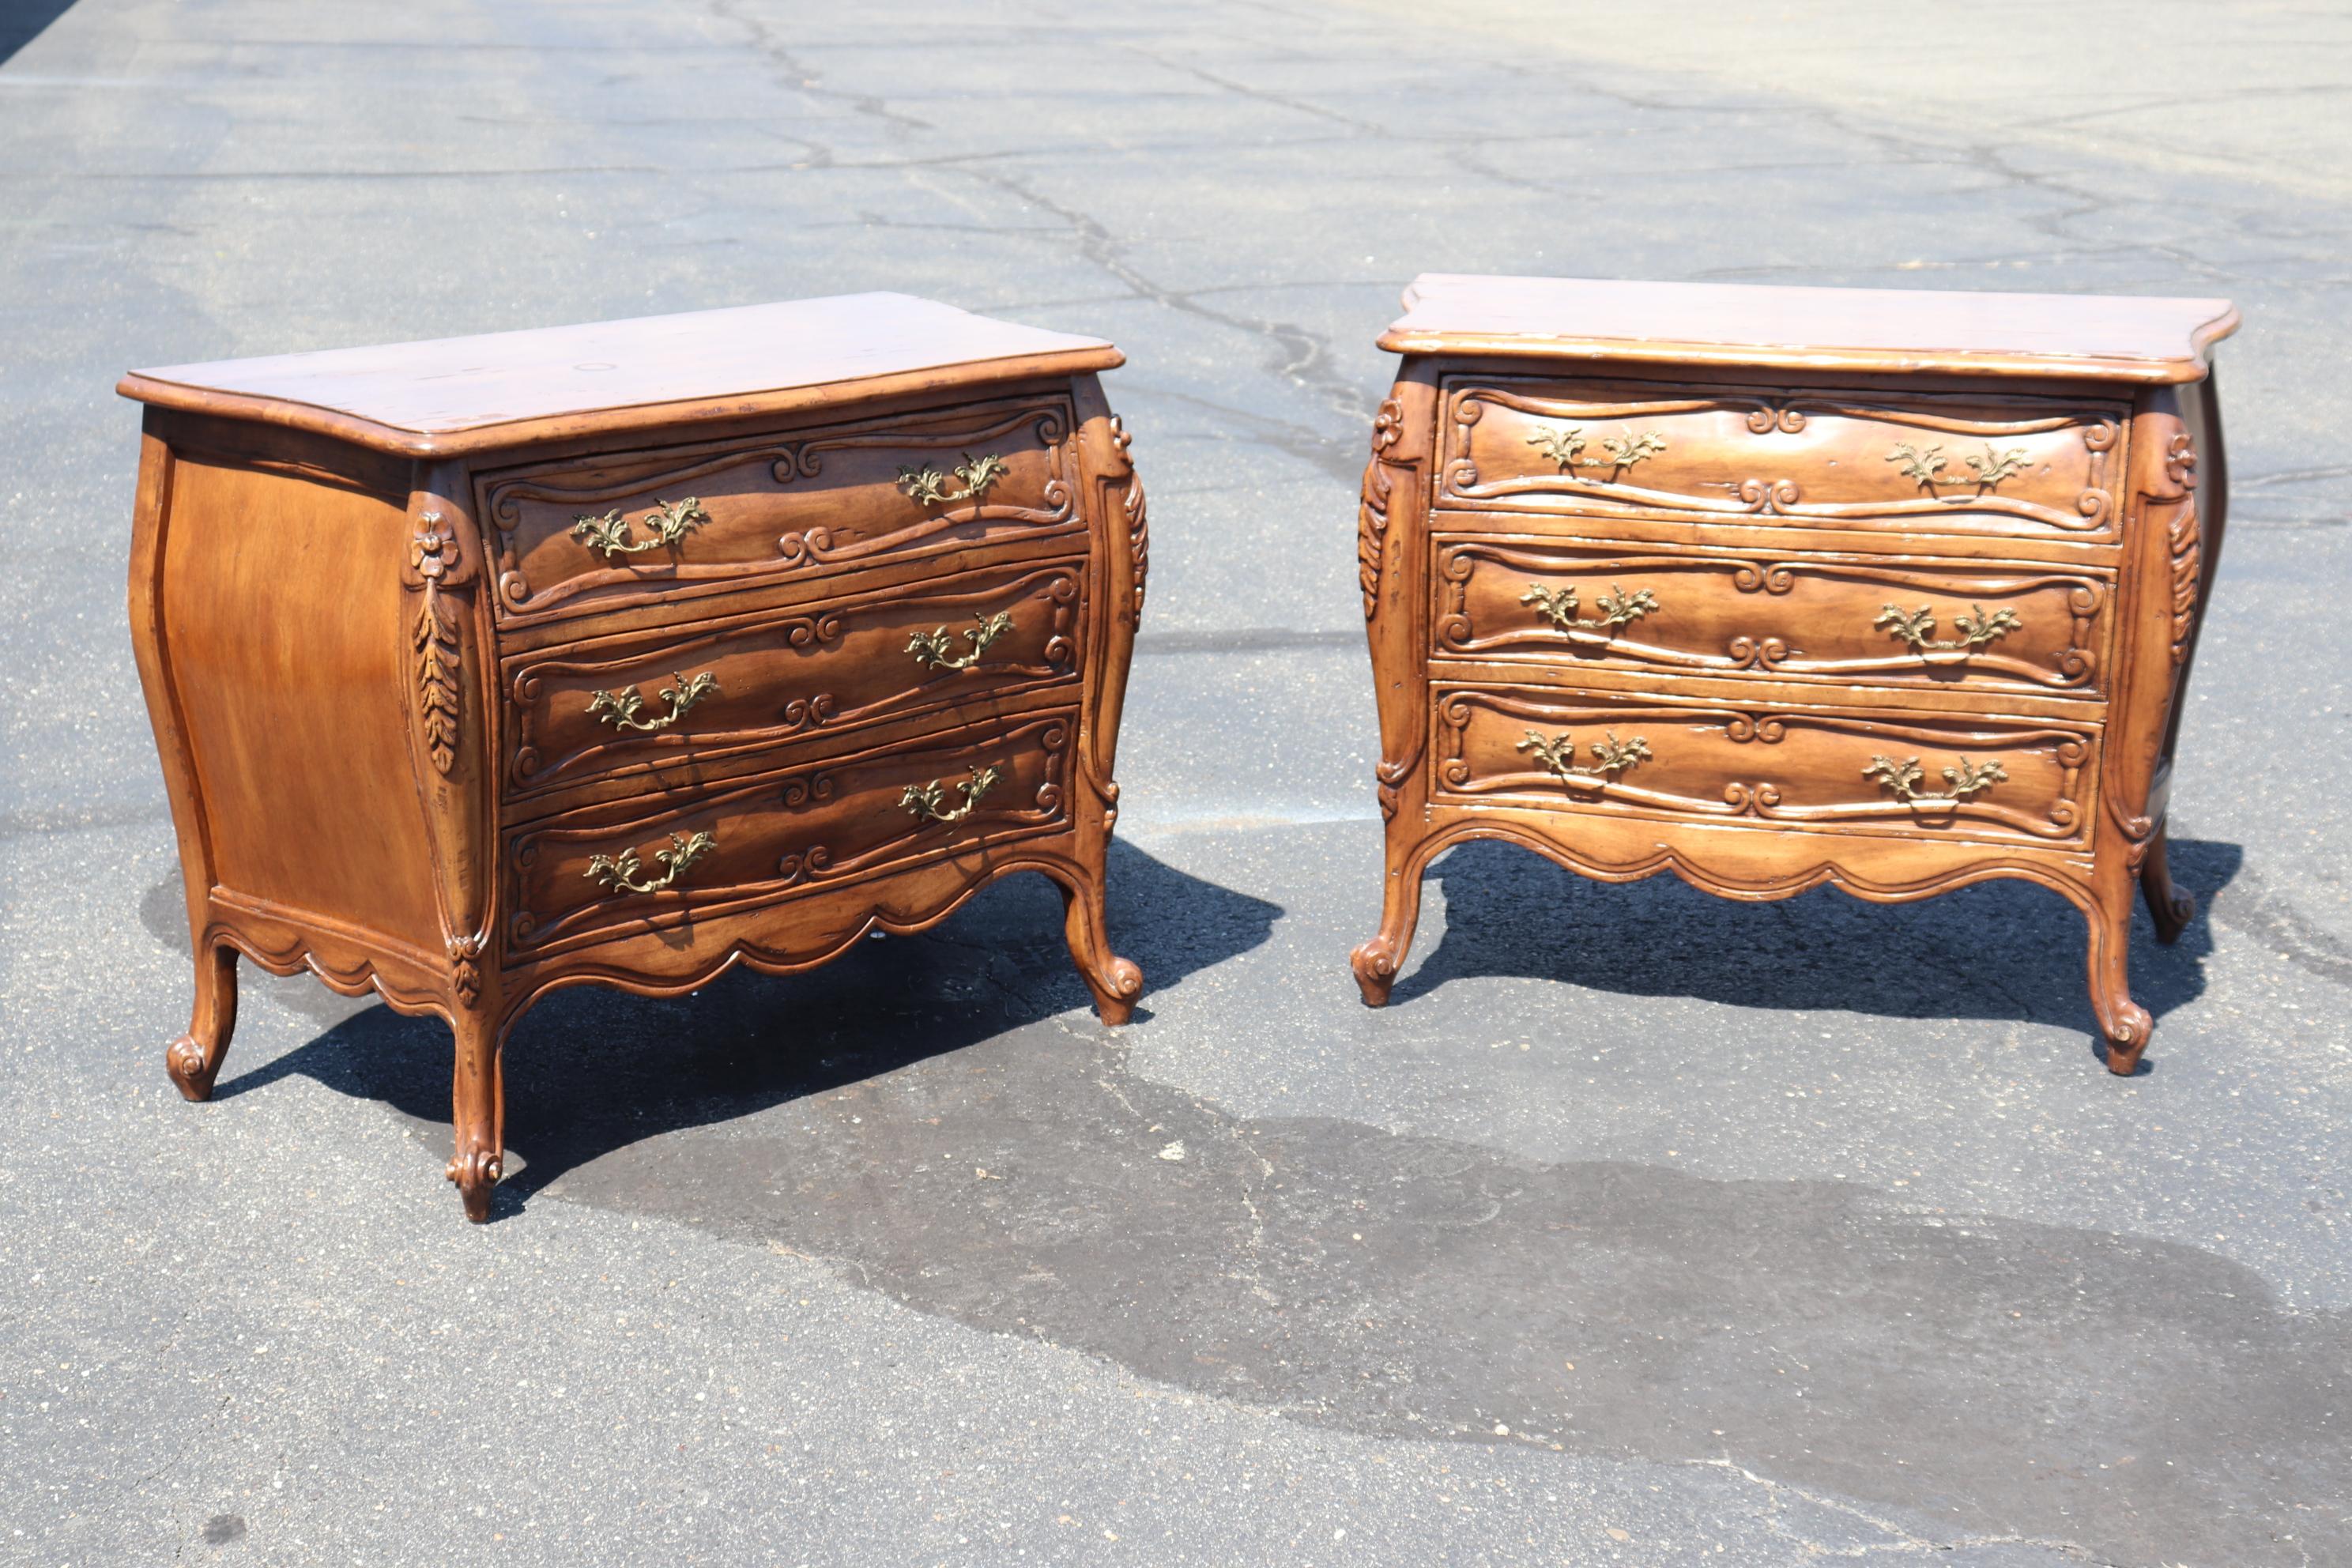 These gorgeous nightstands or commodes are made to look antique with intentional distressed wood with an antique finish too. The drawers are super-smooth with metal slides. The commodes are in very good condition and have no major issues. The